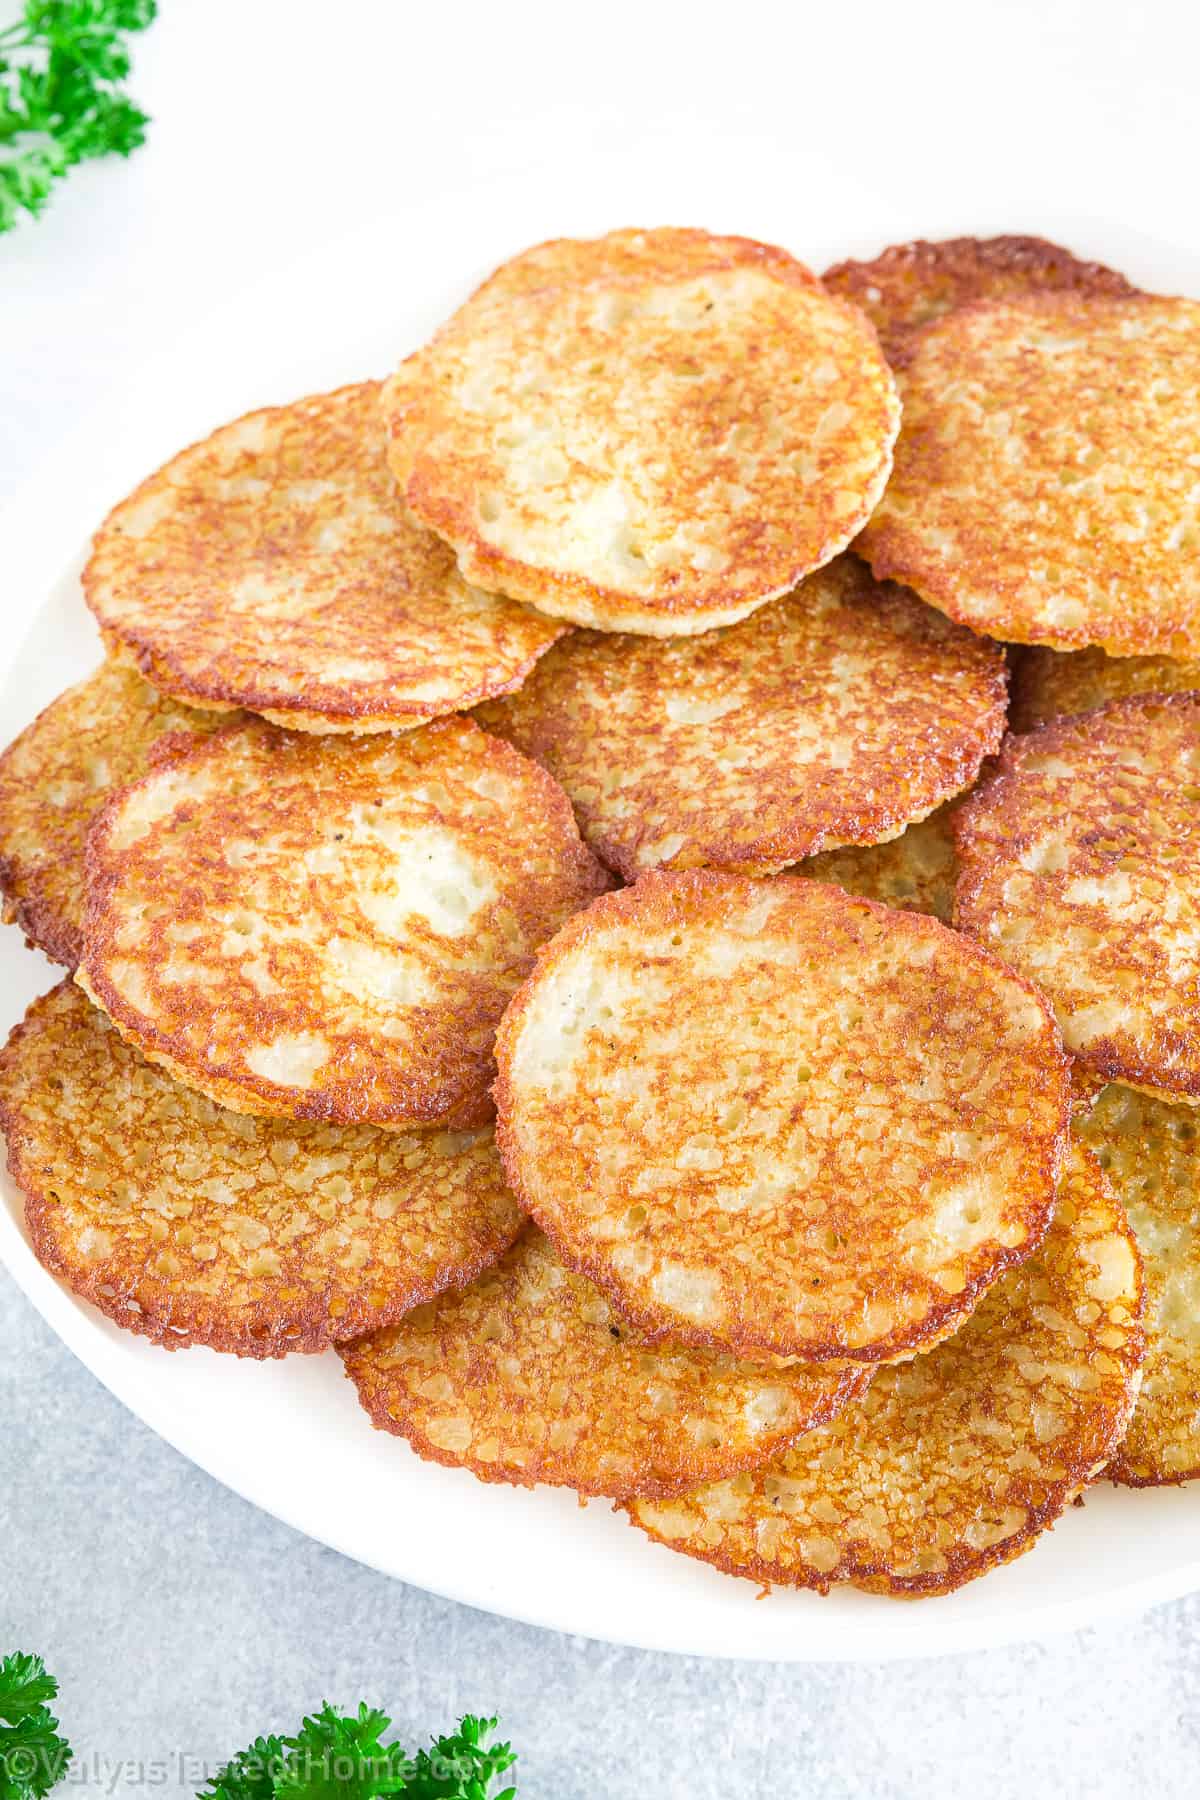 Your delicious Potato Pancakes are ready to be served! Serve them immediately with sour cream.